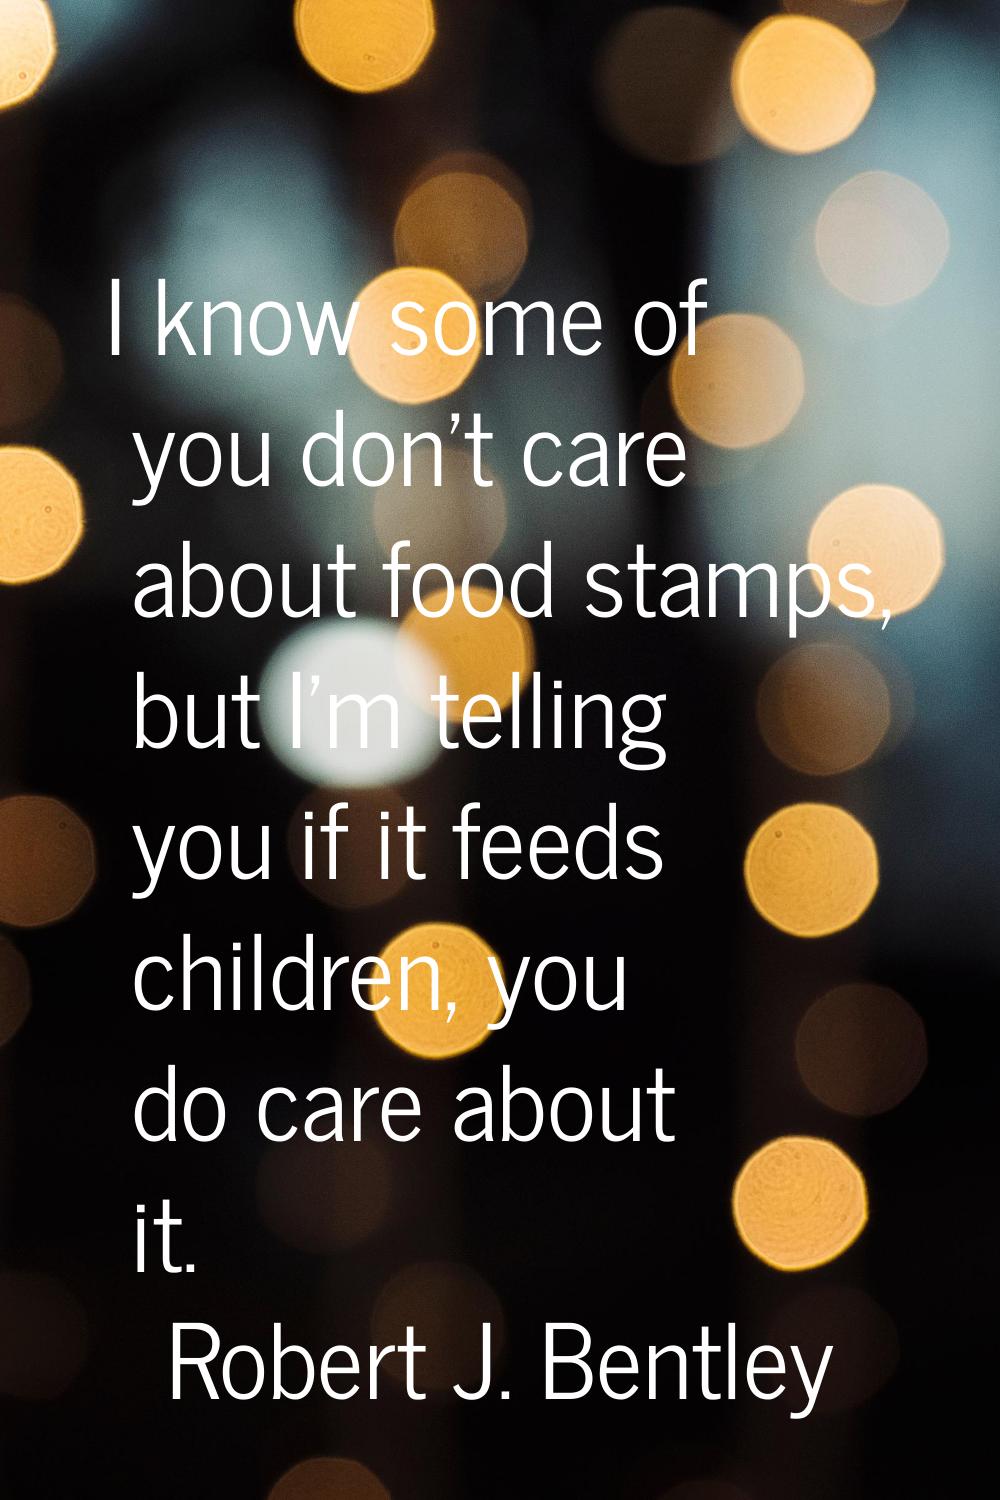 I know some of you don't care about food stamps, but I'm telling you if it feeds children, you do c